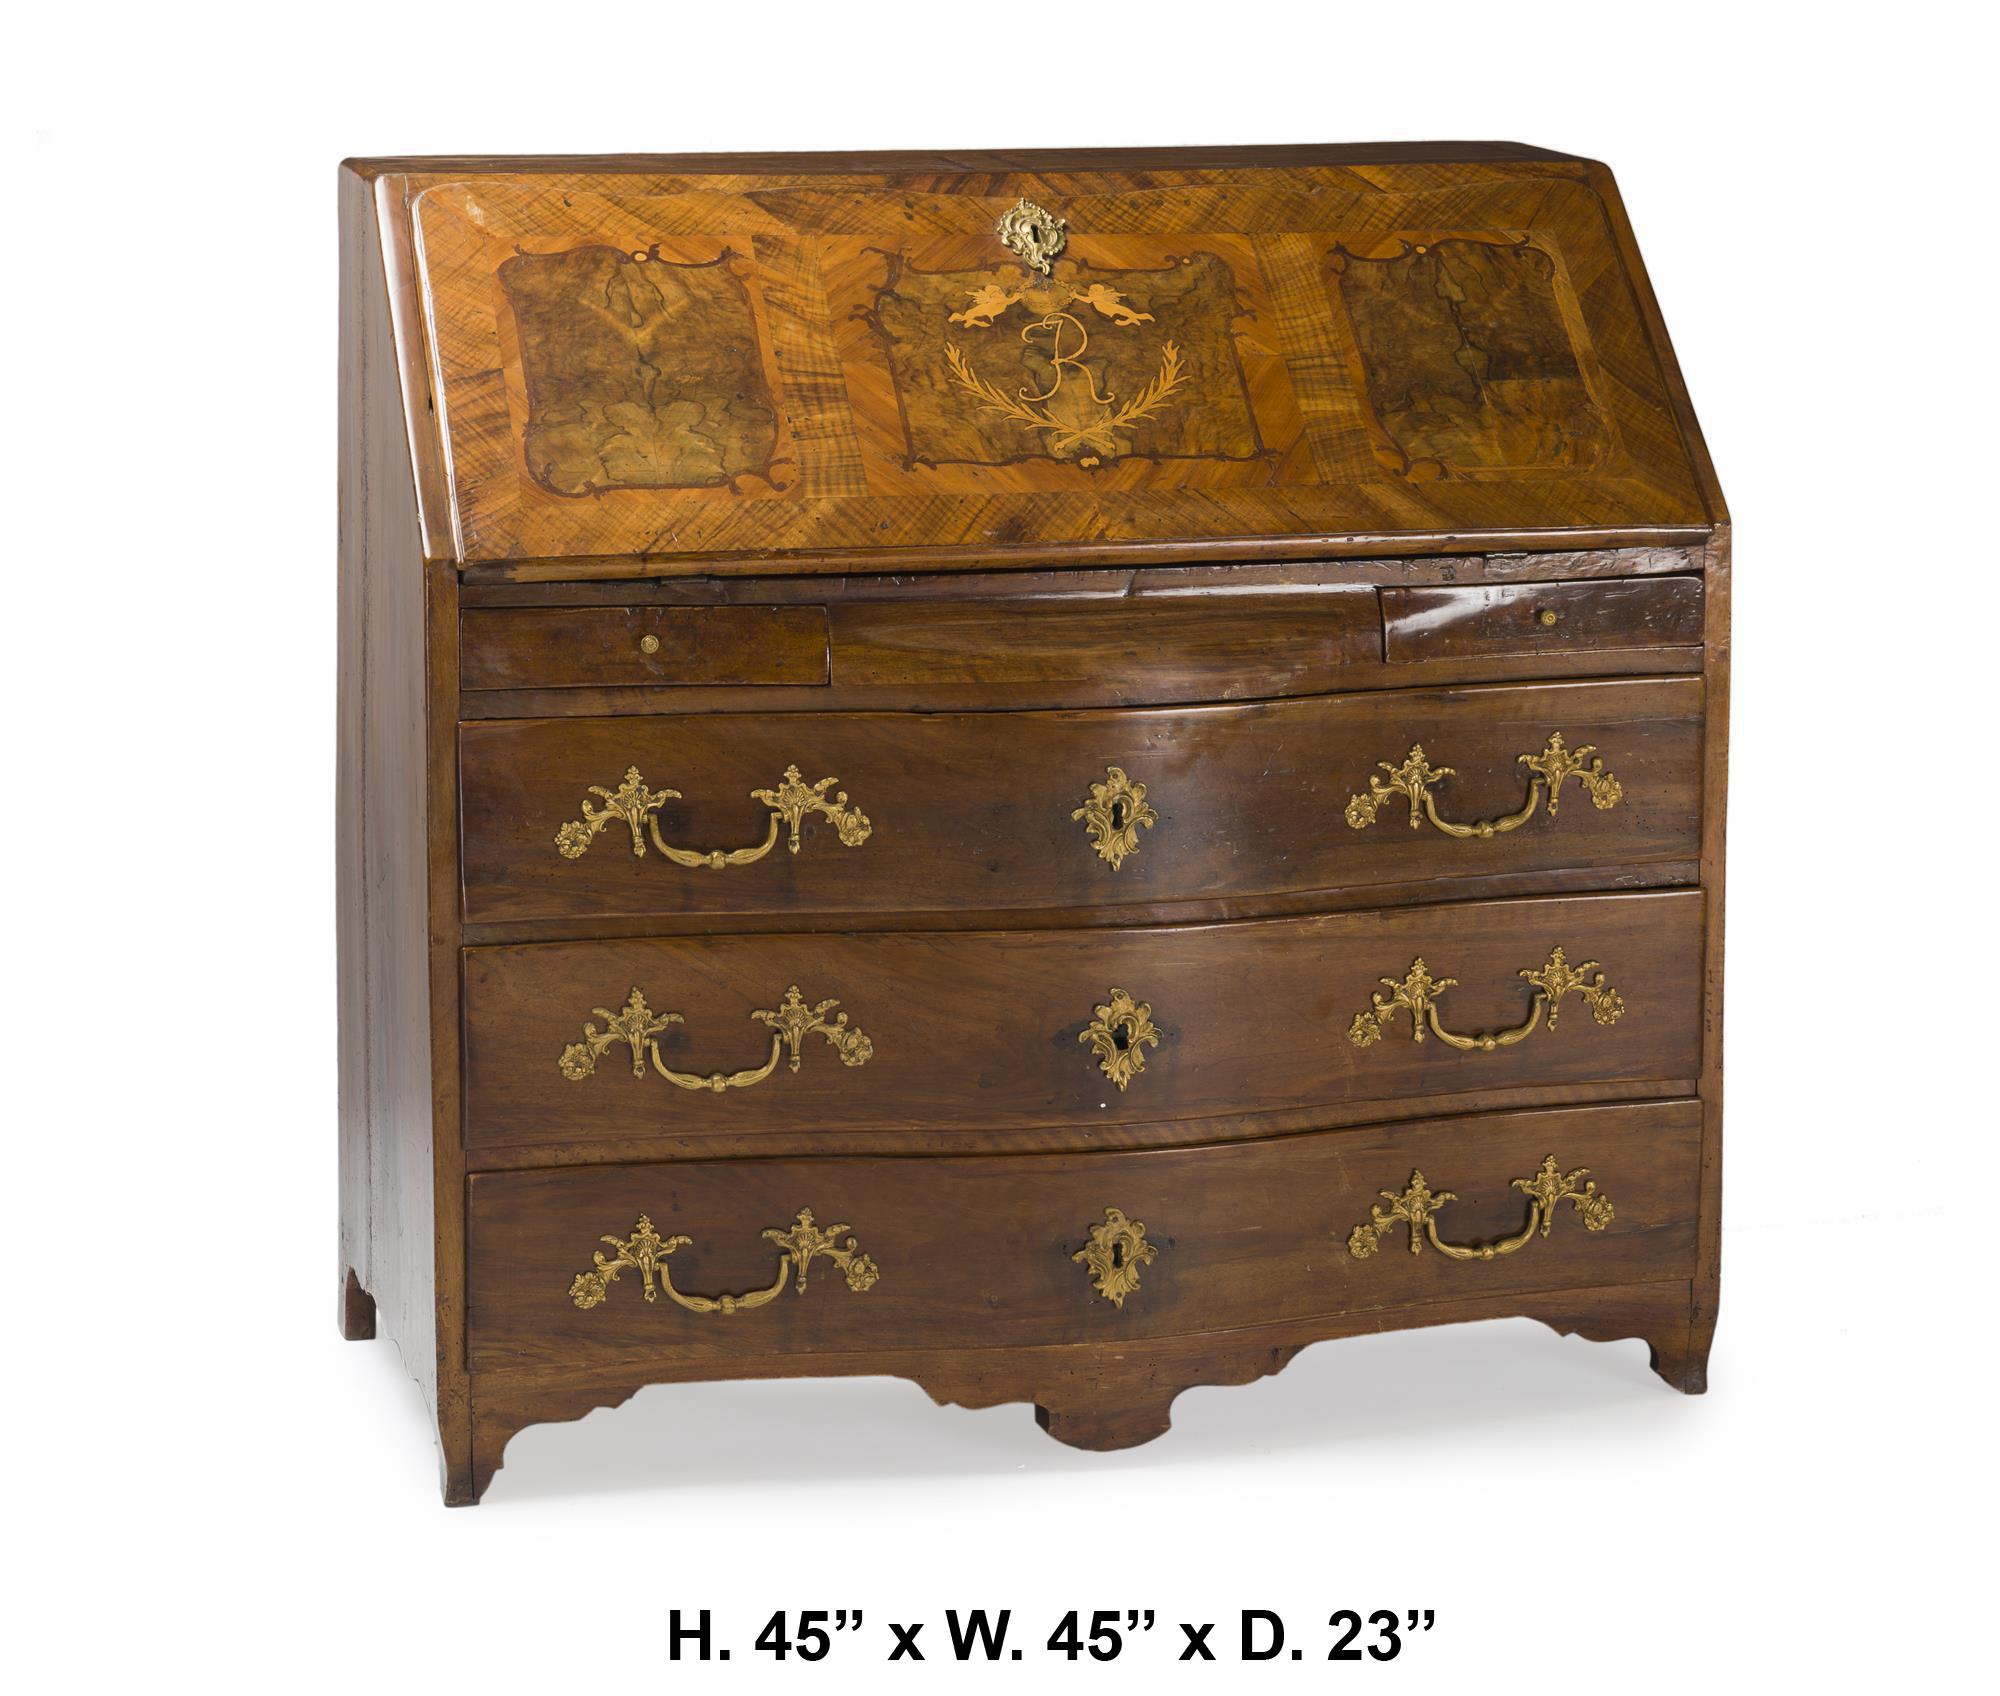 Imposing Italian Baroque inlaid walnut slant desk
Late 18th century. 
The drop-front top personalized 